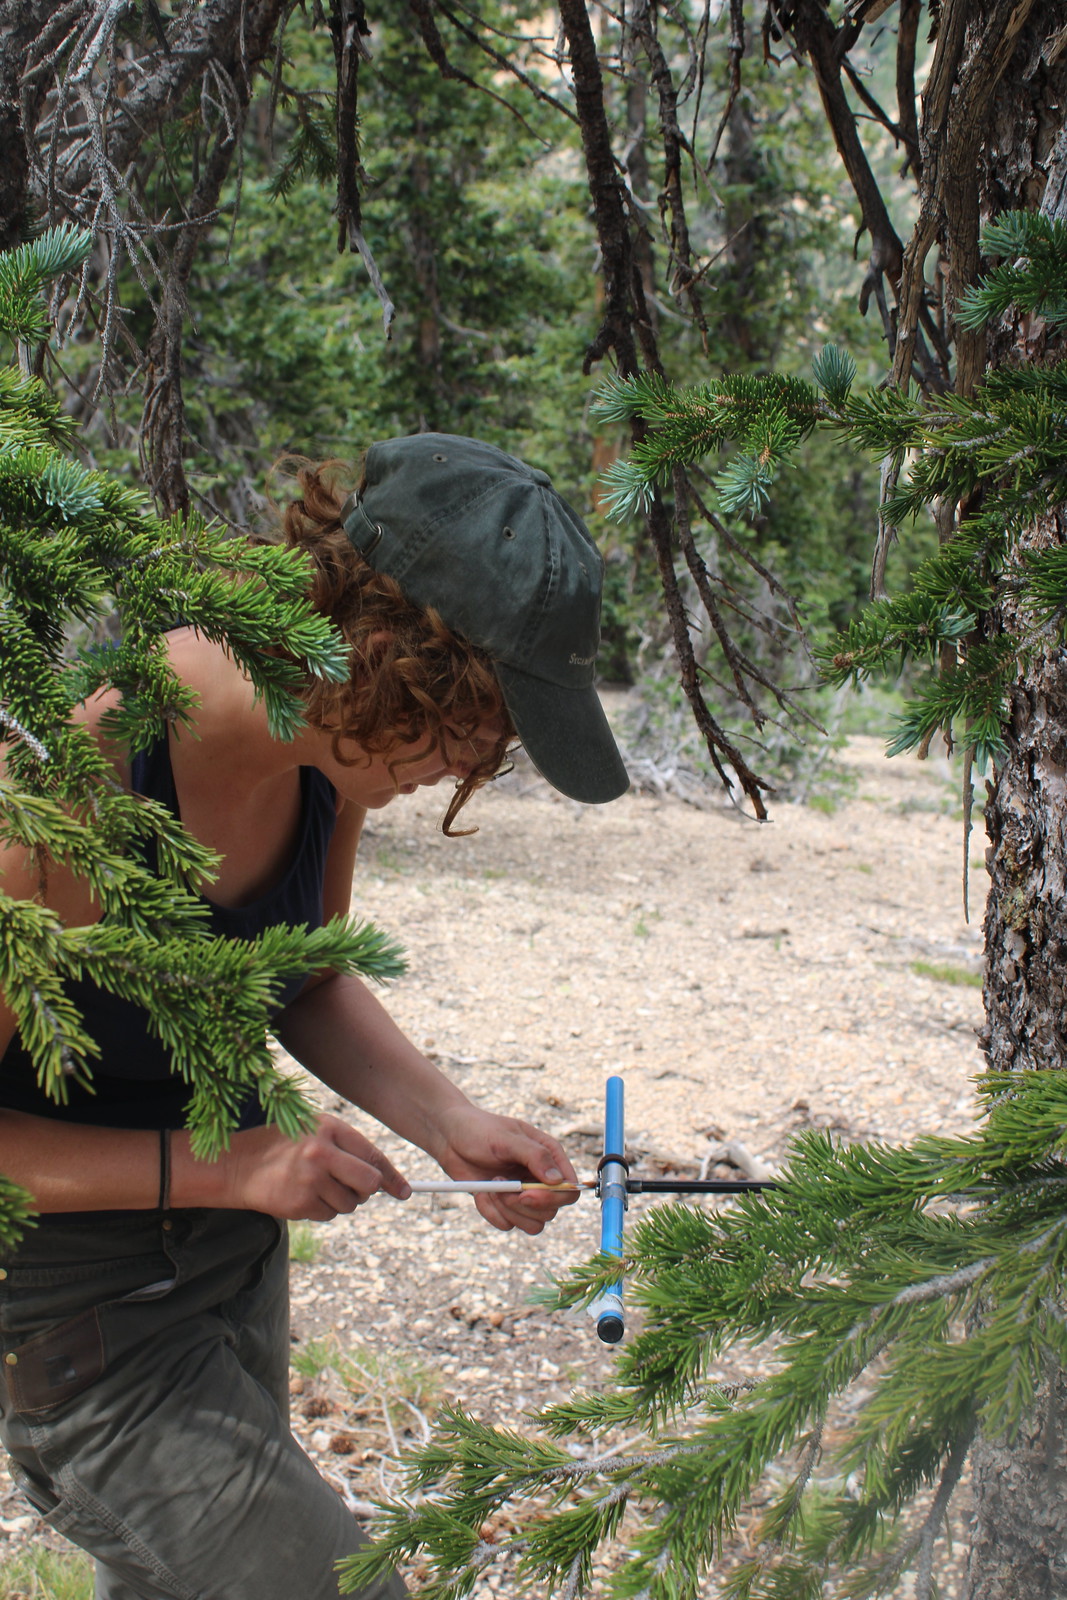 extracting a tree core sample